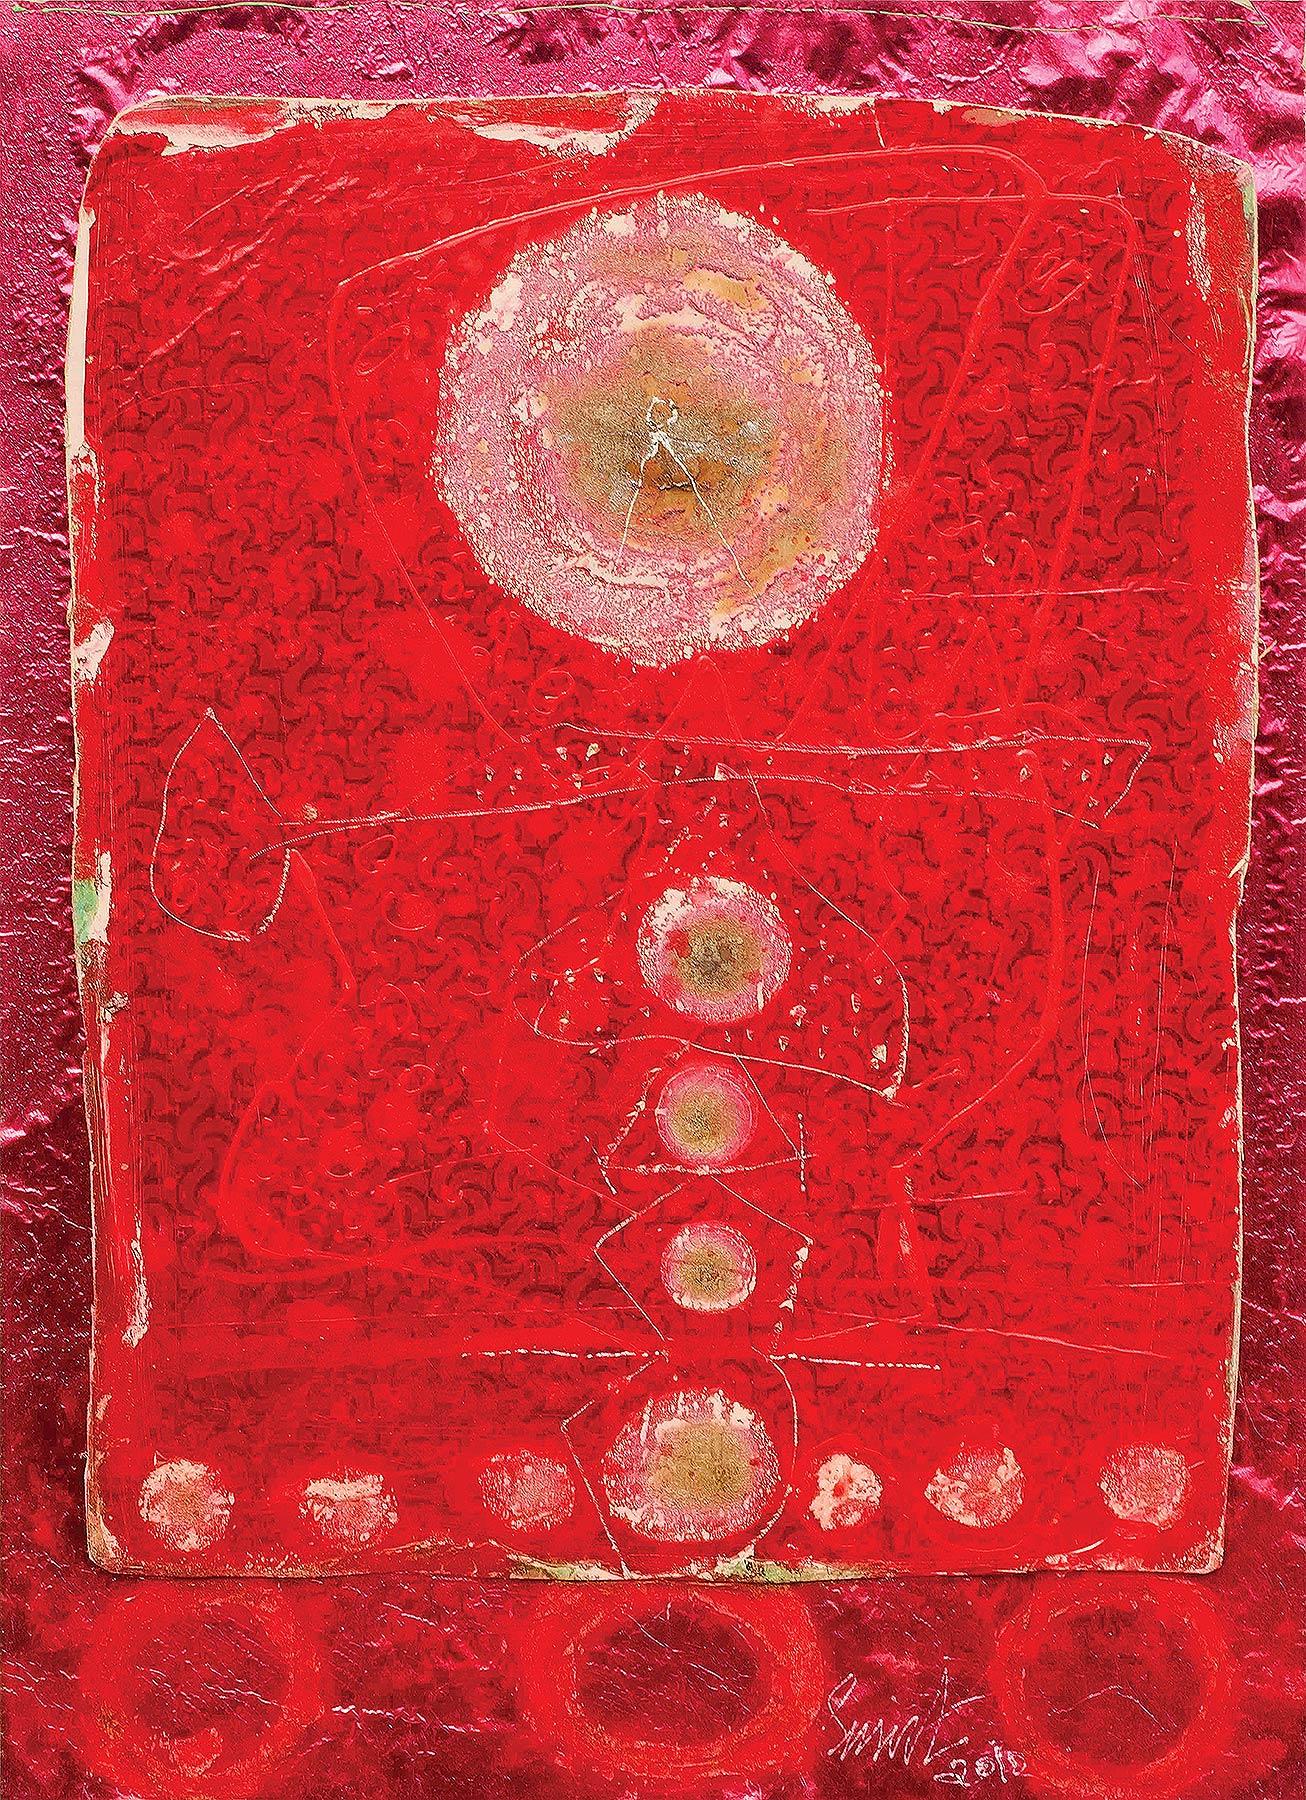 Sunil Das Abstract Painting - Collage Series VI, Mixed Media, Paper, Foil, Acrylic, Red, Pink "In Stock"